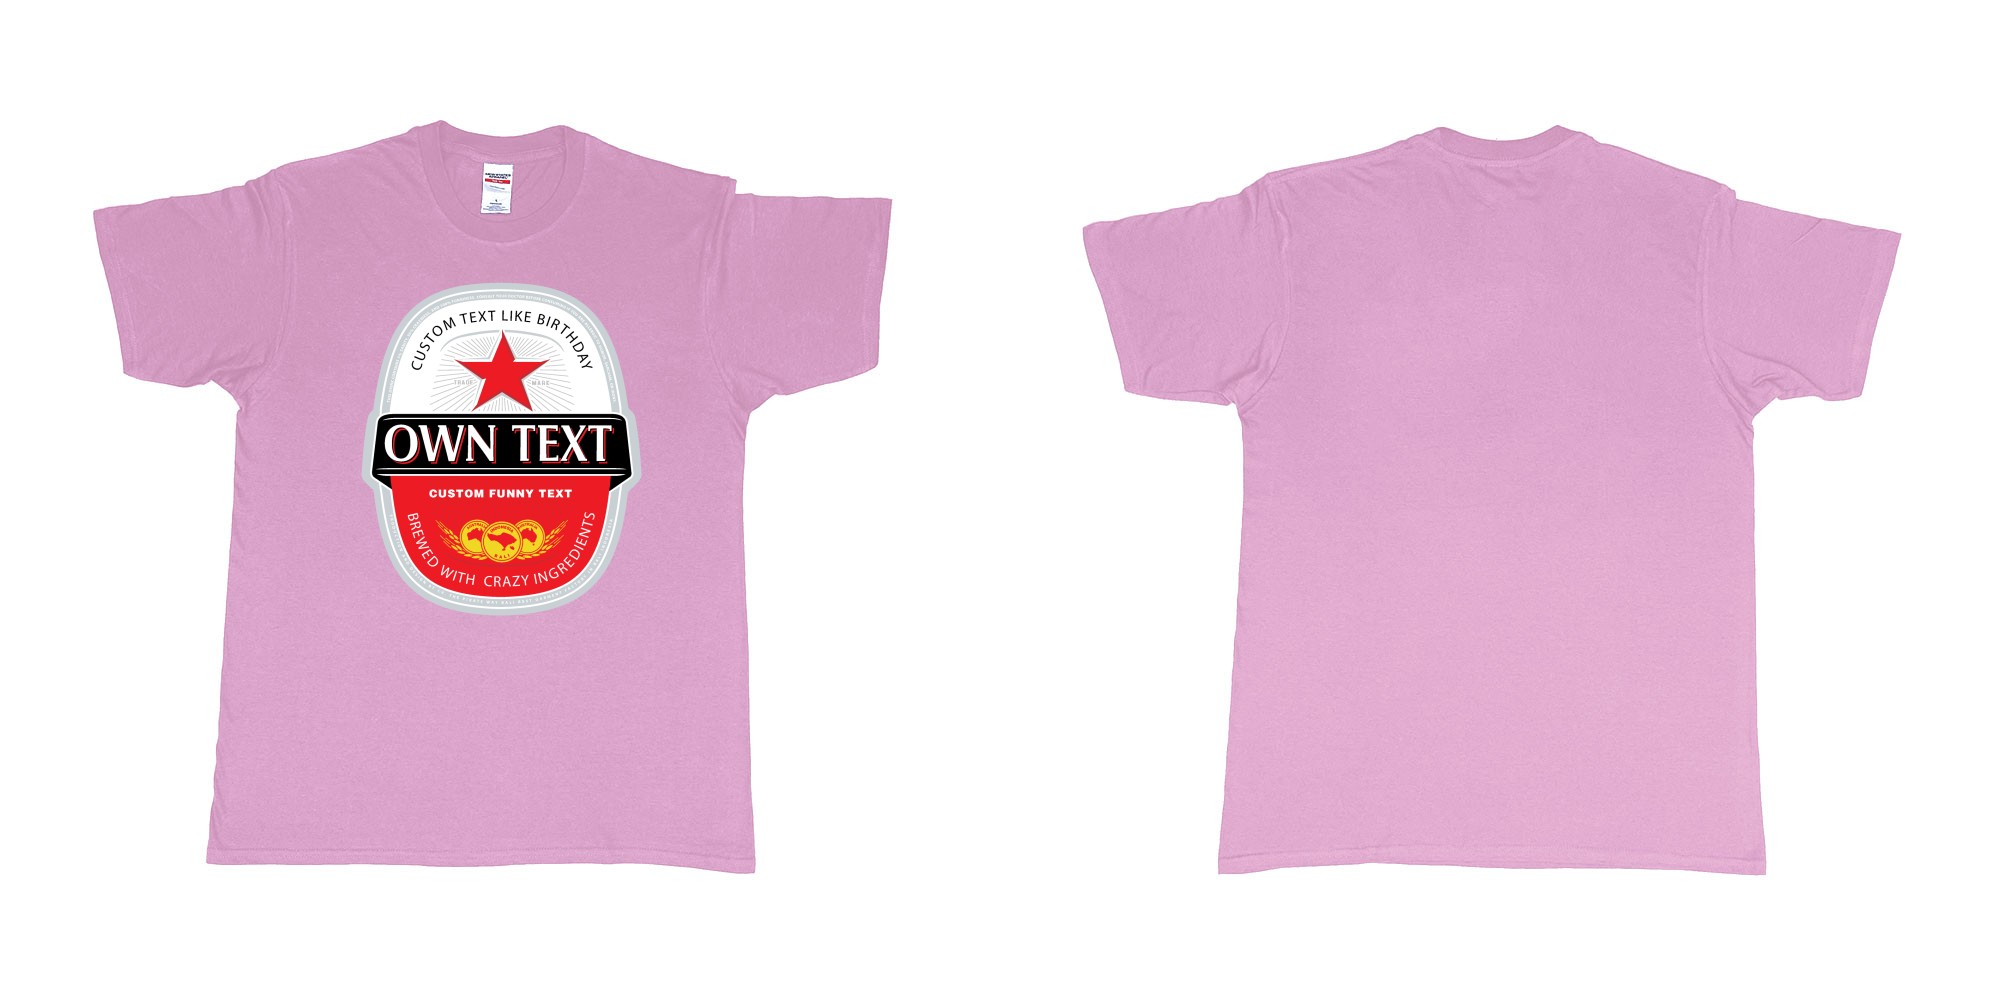 Custom tshirt design beer bintang large label in fabric color light-pink choice your own text made in Bali by The Pirate Way